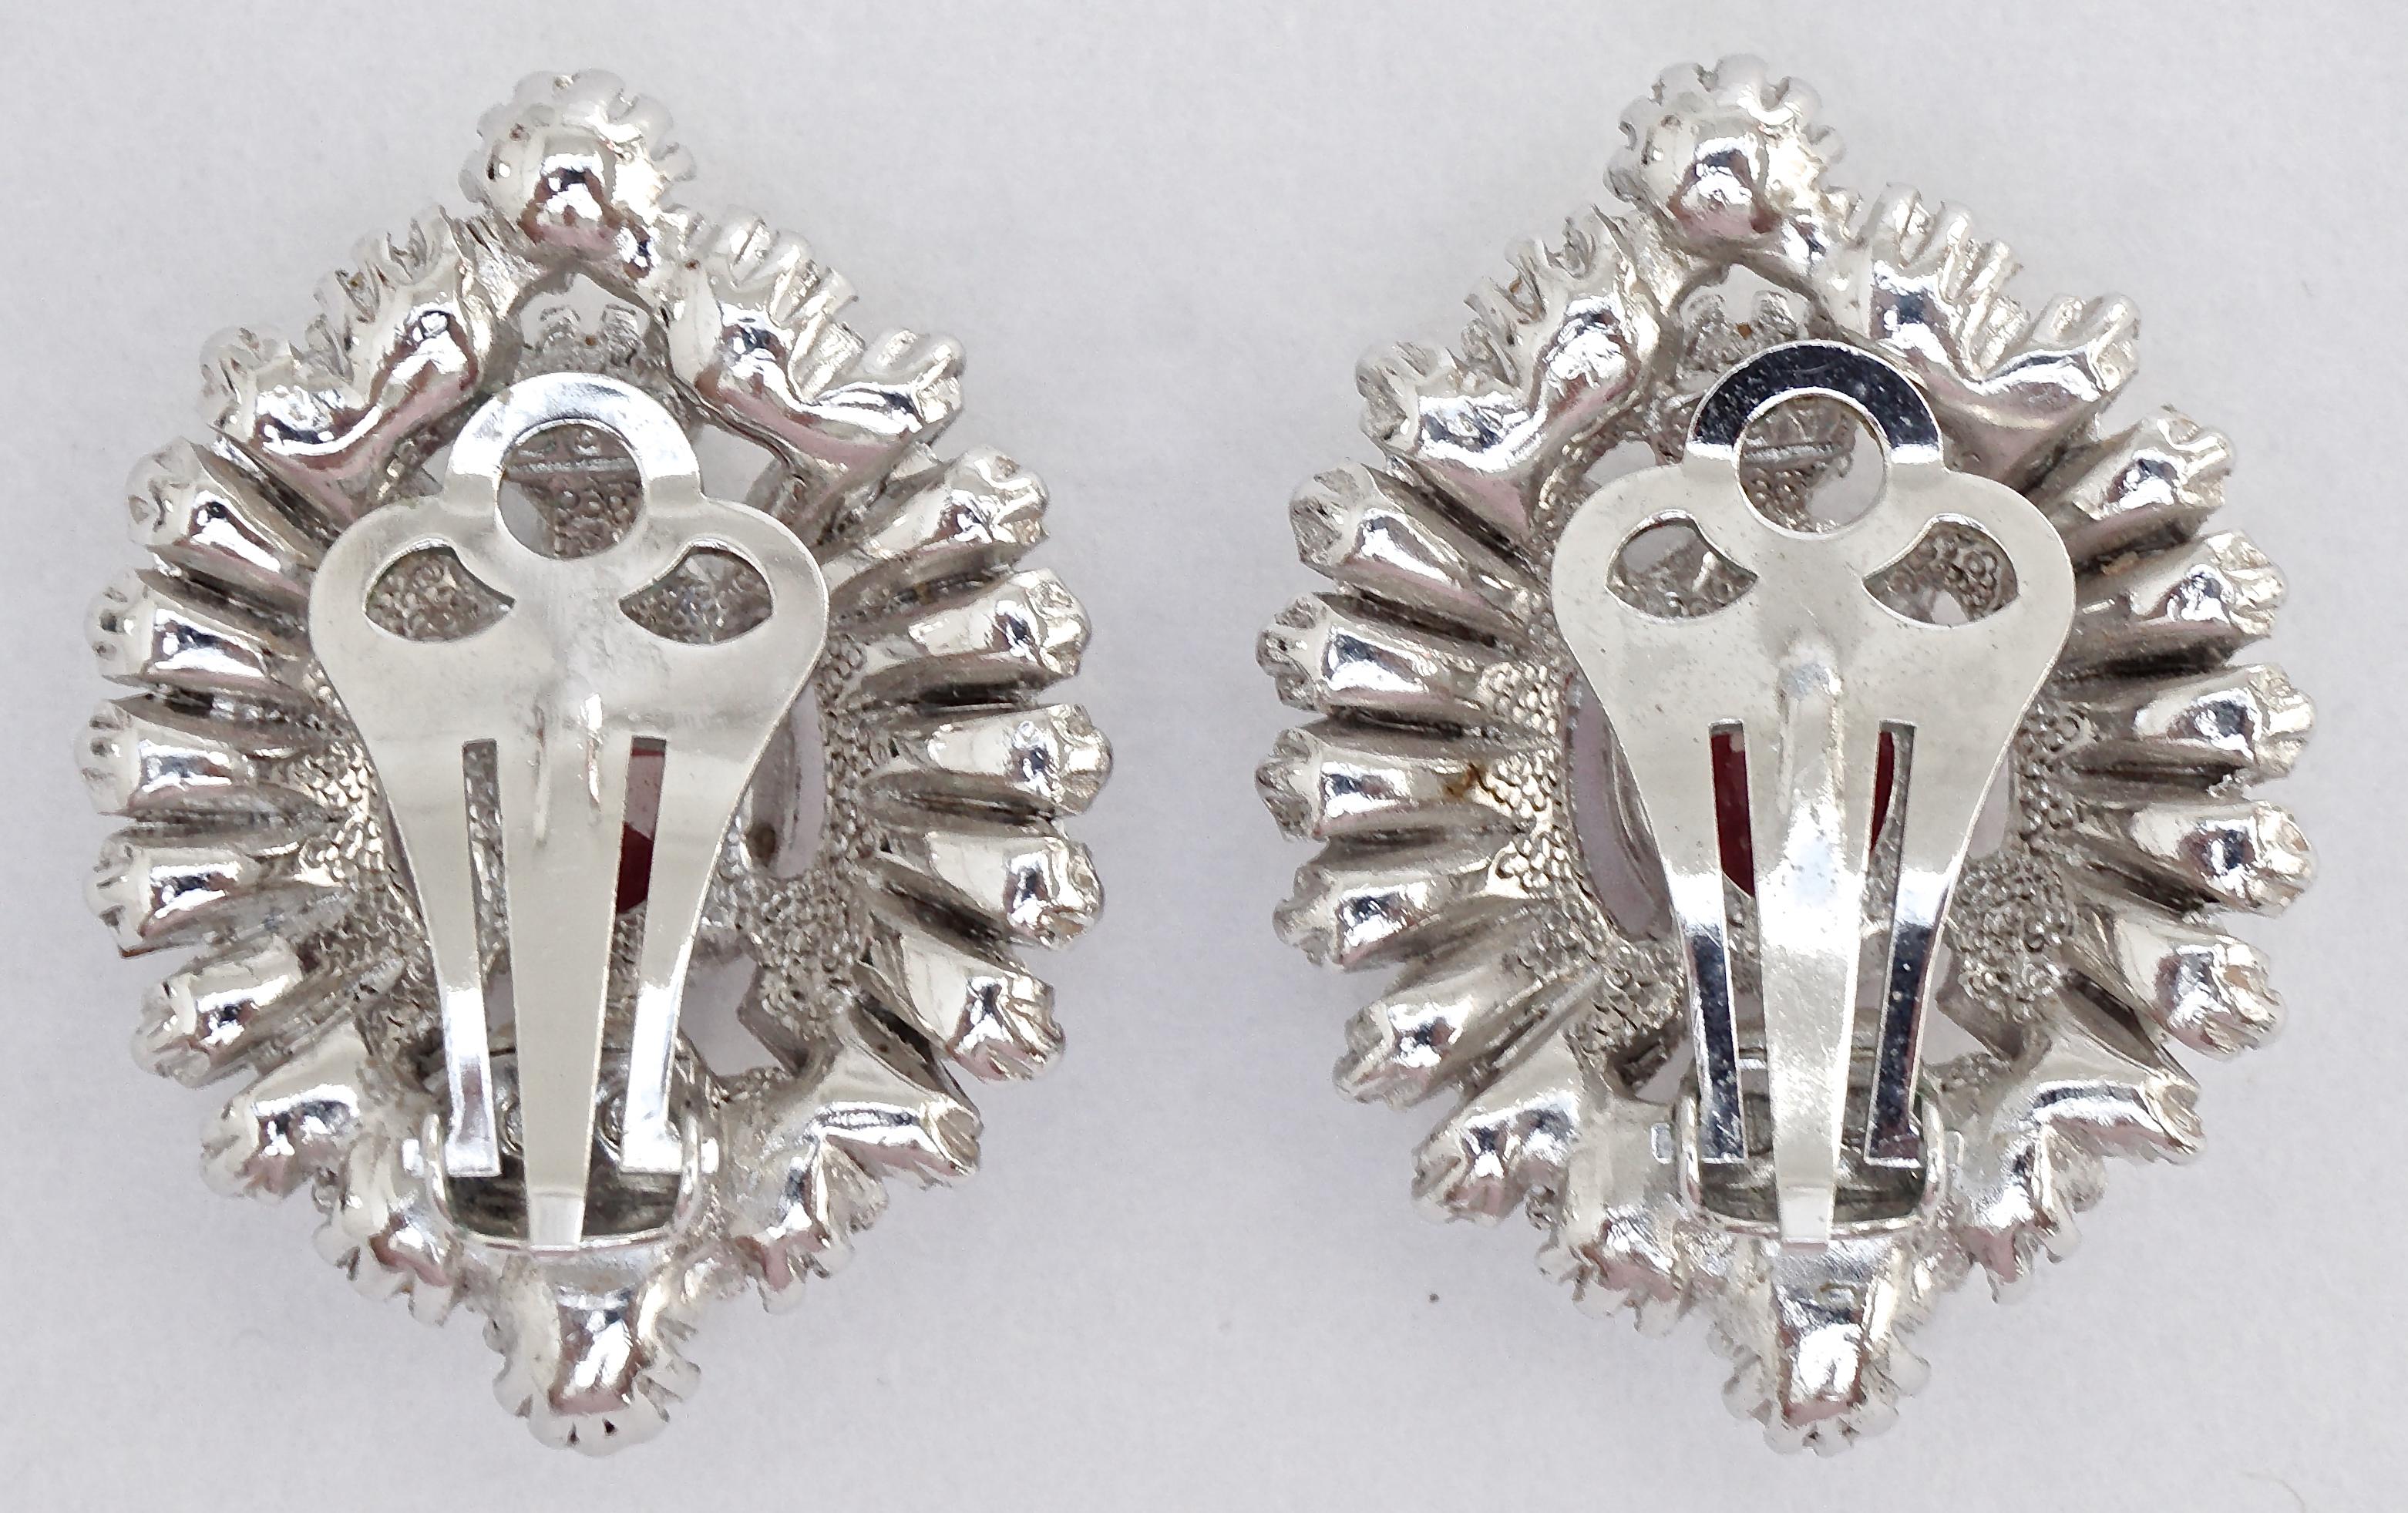 Beautiful Attwood & Sawyer silver tone clip on earrings set with round and baguette clear rhinestones, and a centre ruby red rhinestone. The earrings are in very good condition, and measure 3cm / 1.18 inches by 2.2cm / .86 inch.

These sophisticated